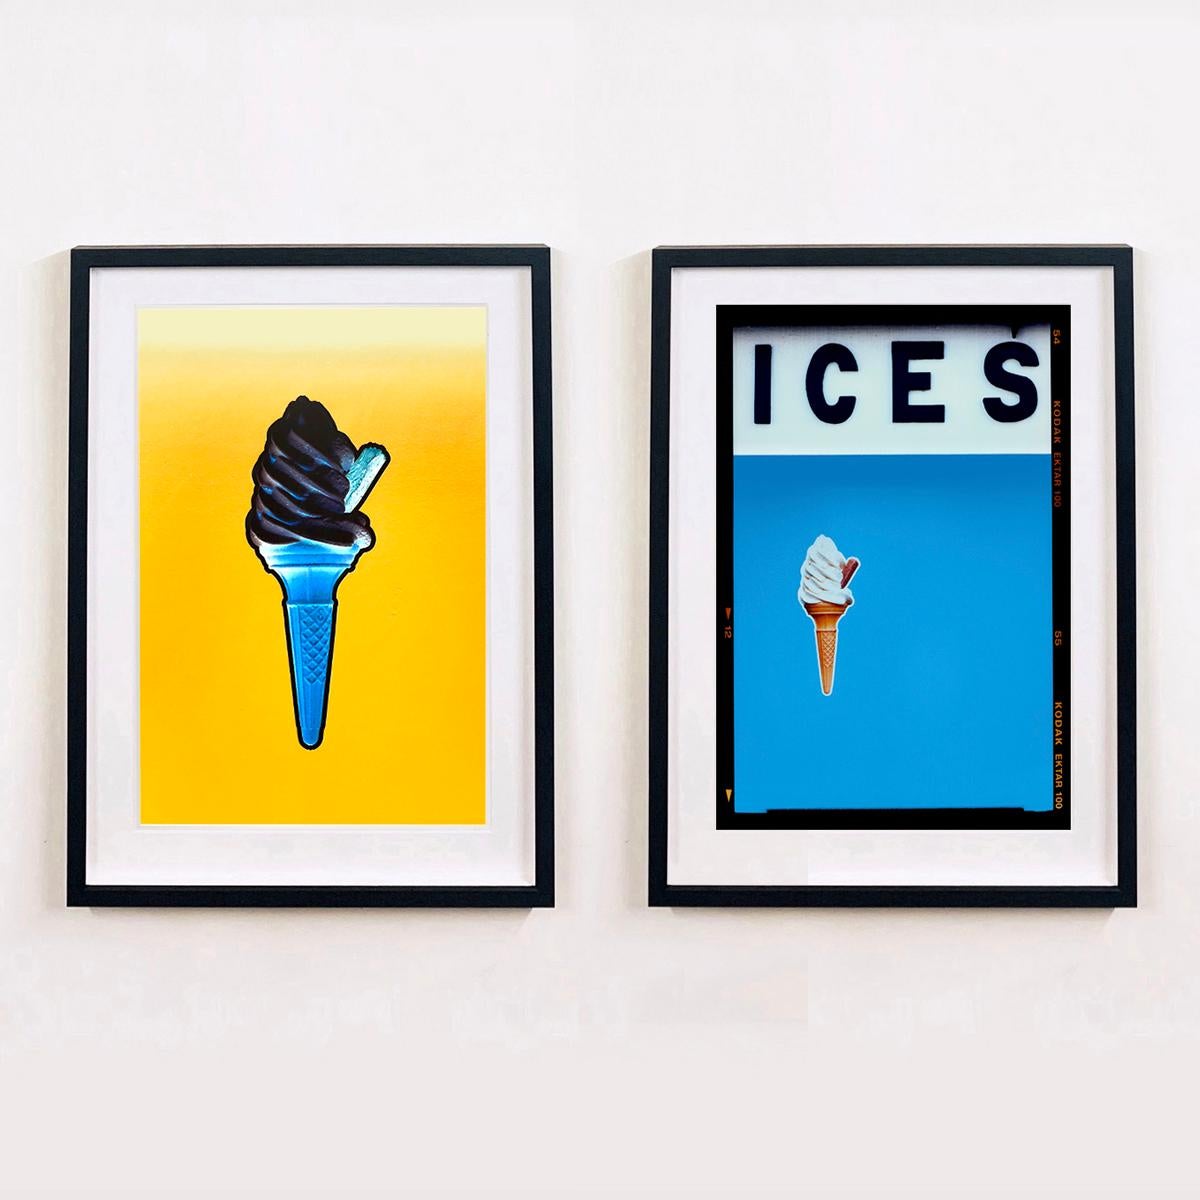 Ices (Sky Blue), Bexhill-on-Sea - British seaside color photography - Contemporary Print by Richard Heeps